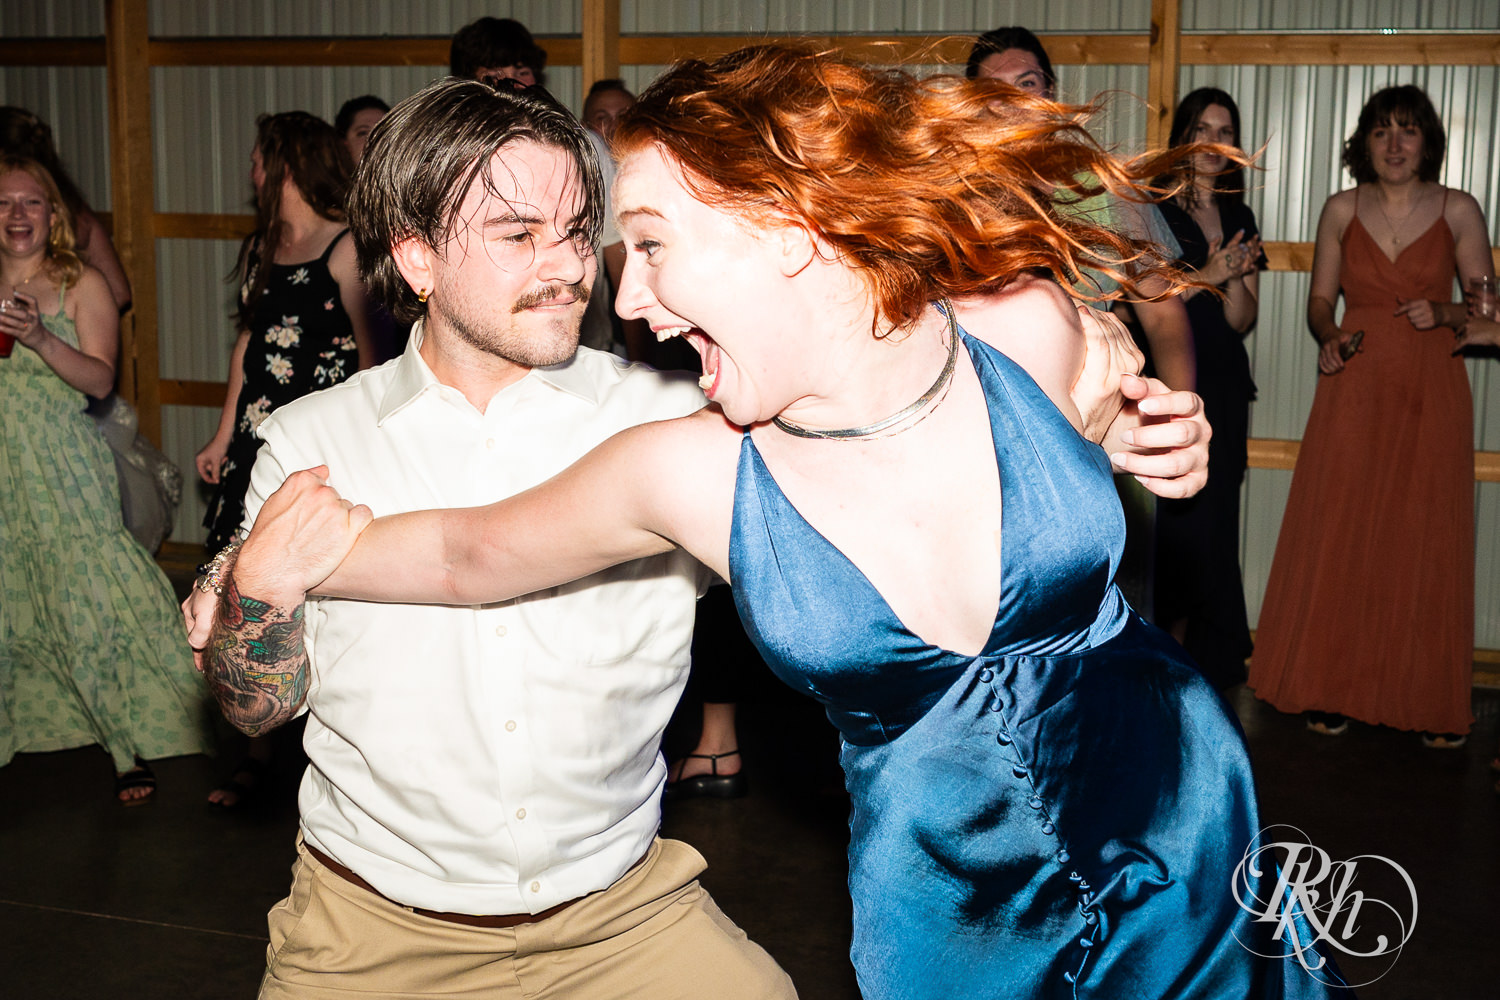 Guests dance during wedding reception at Cottage Farmhouse in Glencoe, Minnesota.